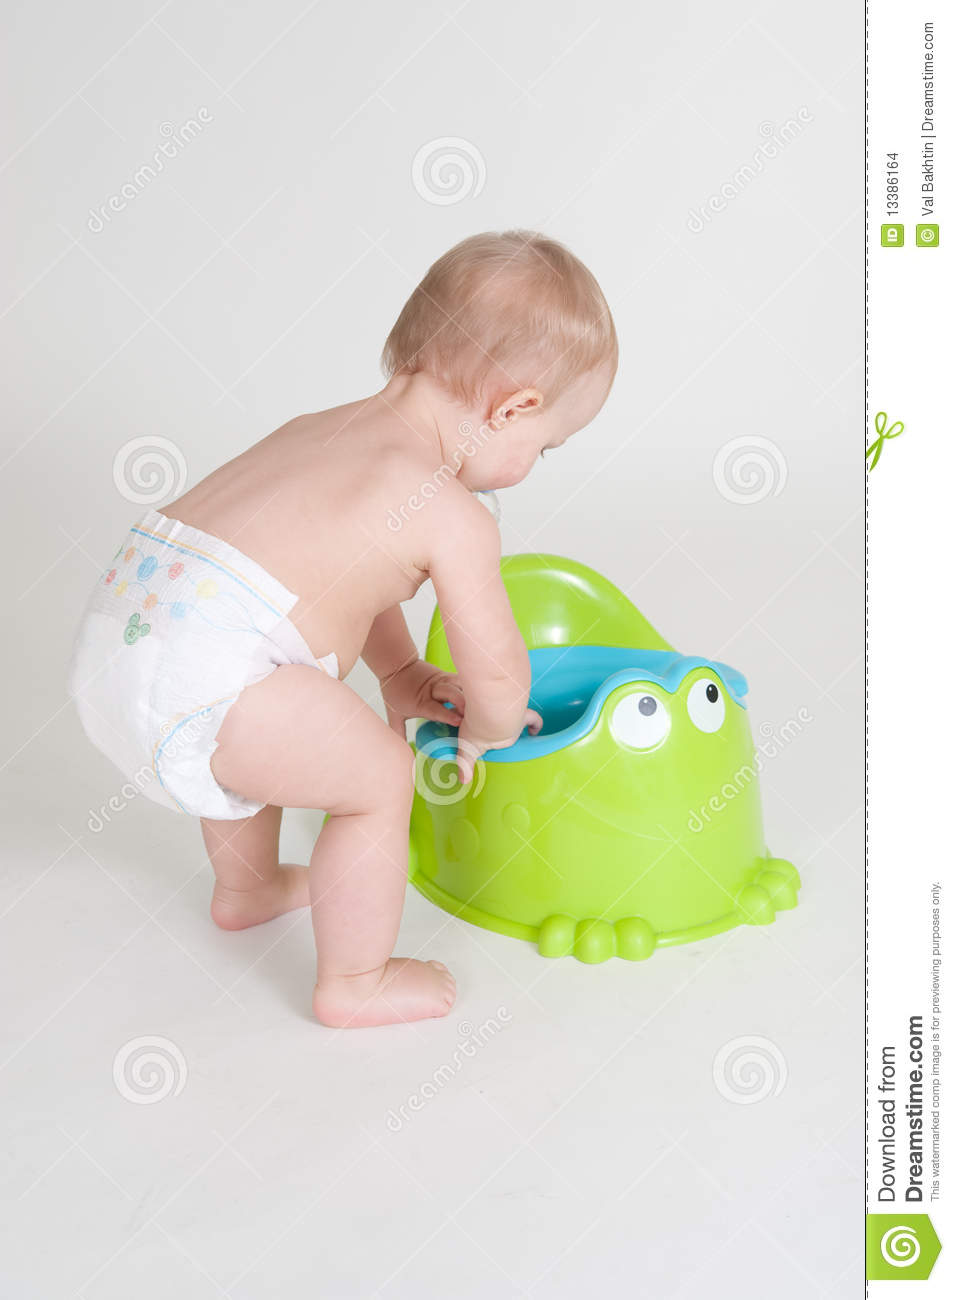 Potty Time Stock Images   Image  13386164